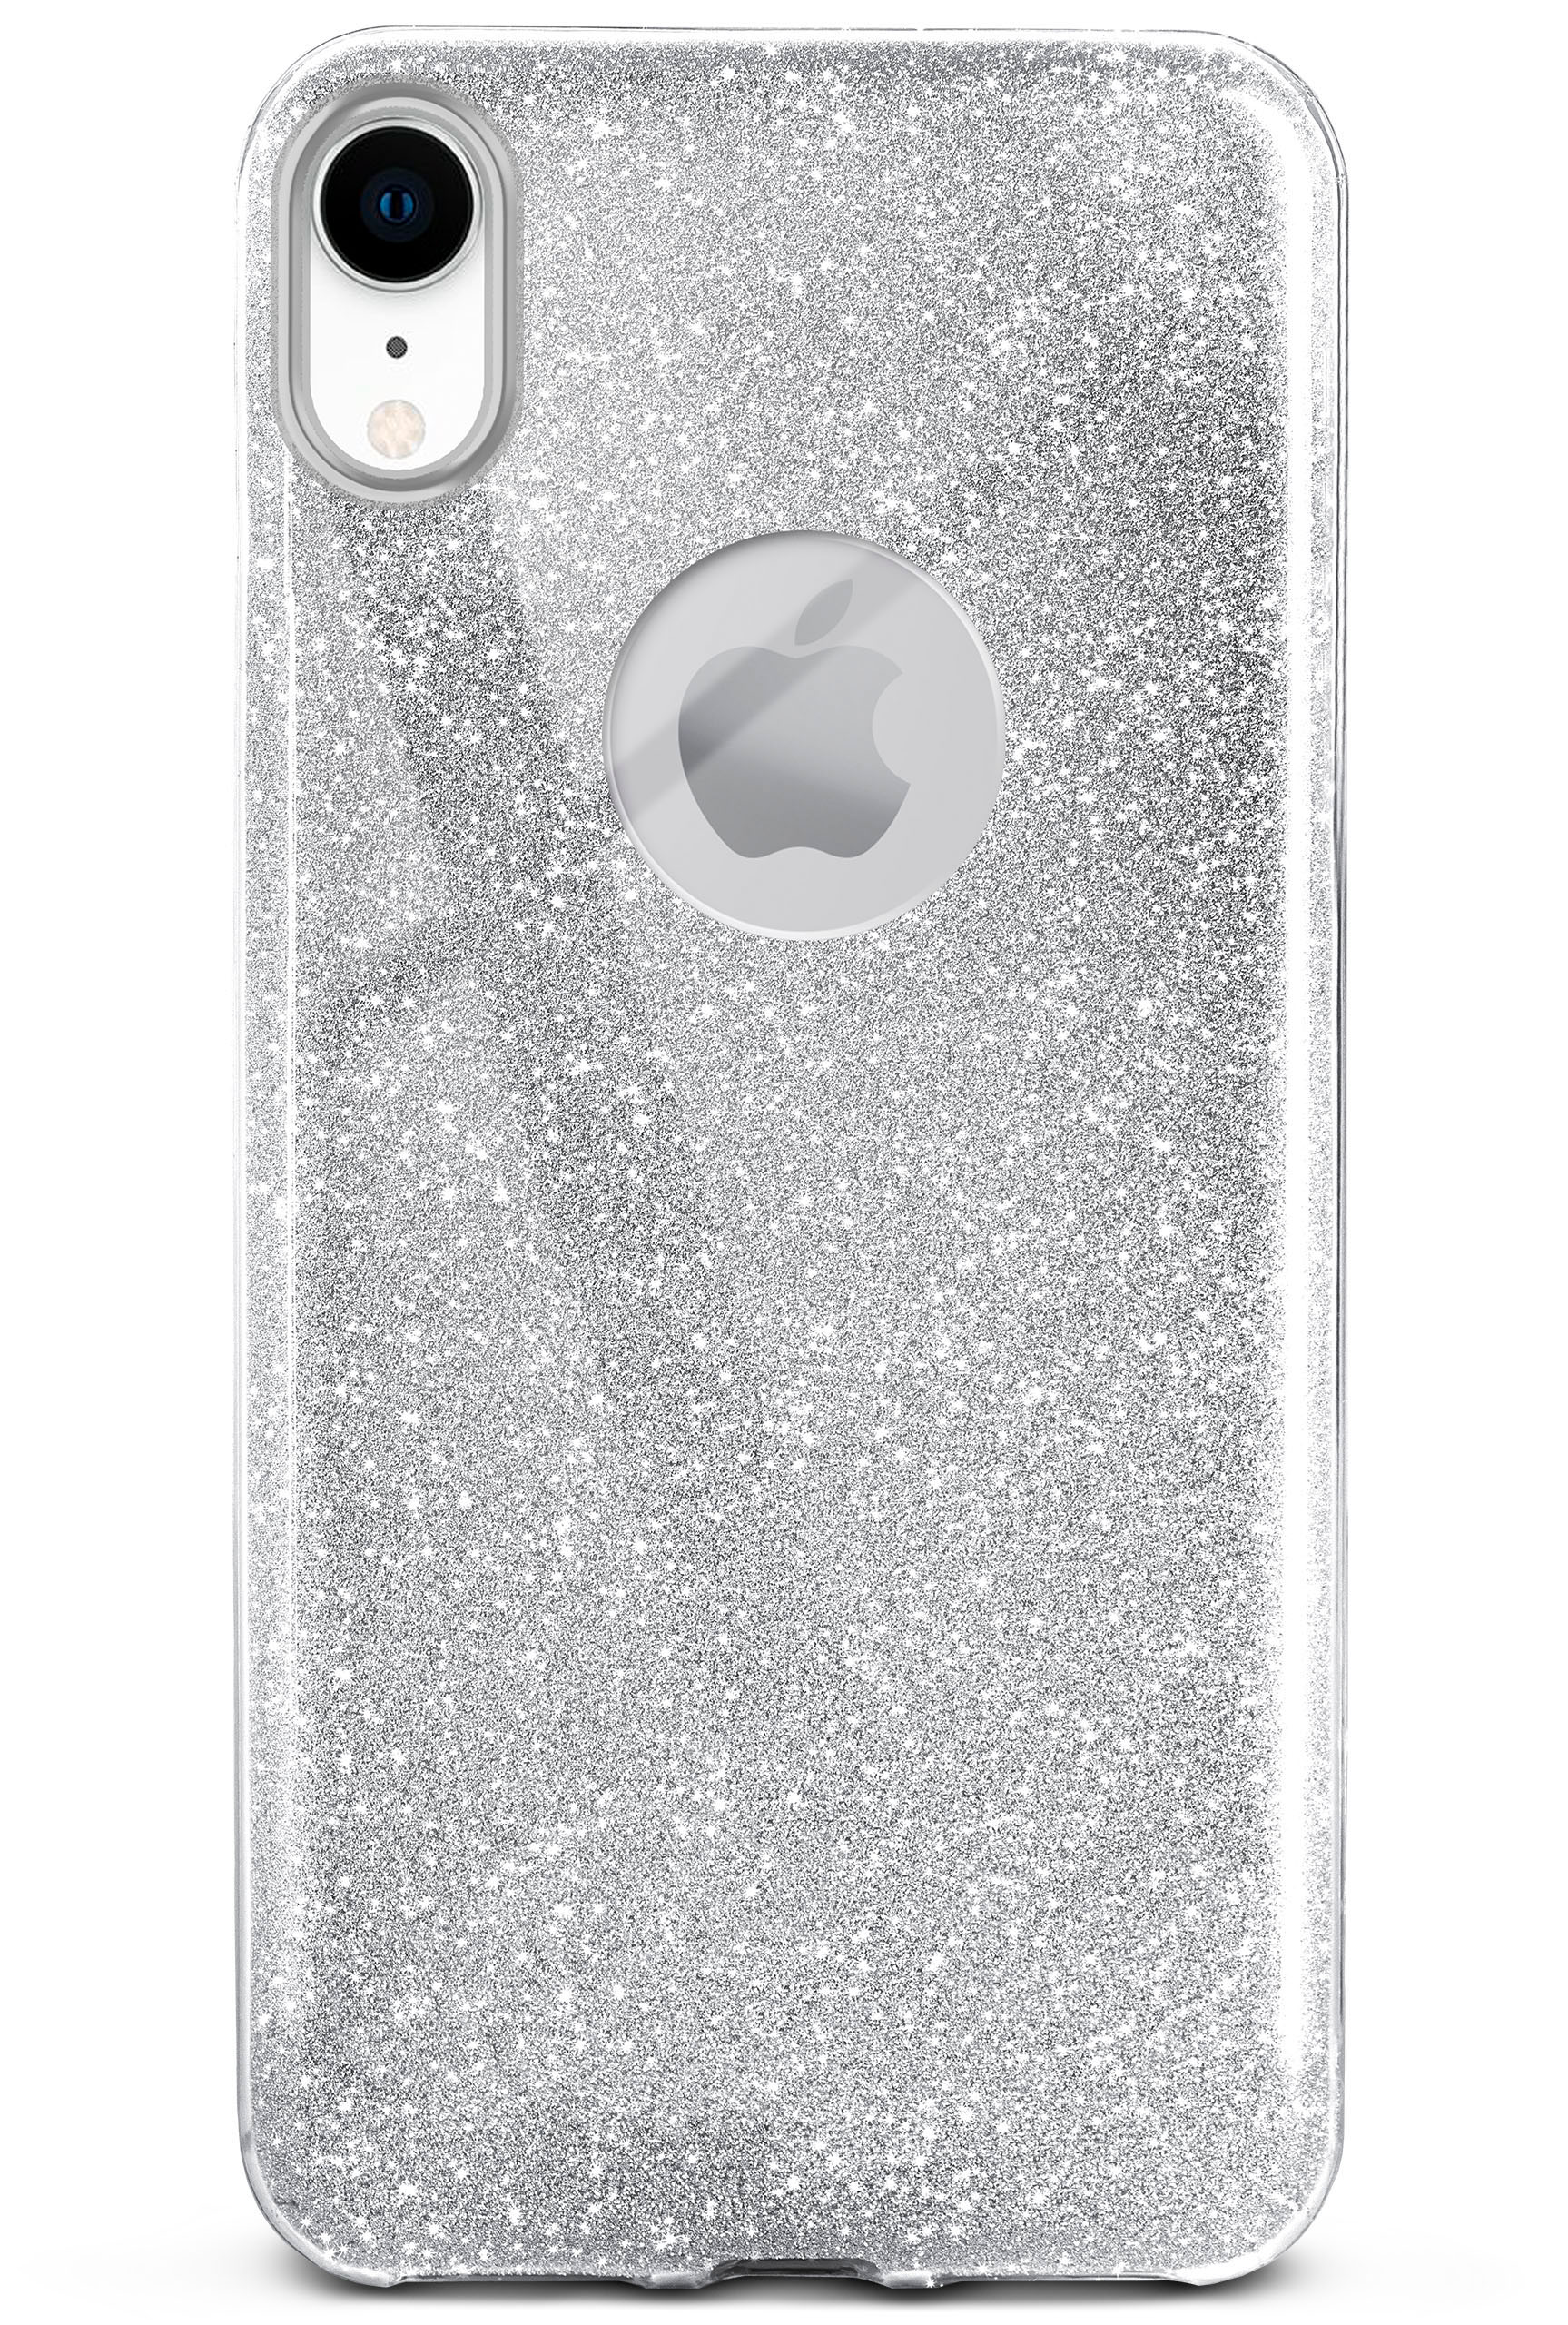 Sparkle - Glitter Case, ONEFLOW XR, Silver Apple, Backcover, iPhone